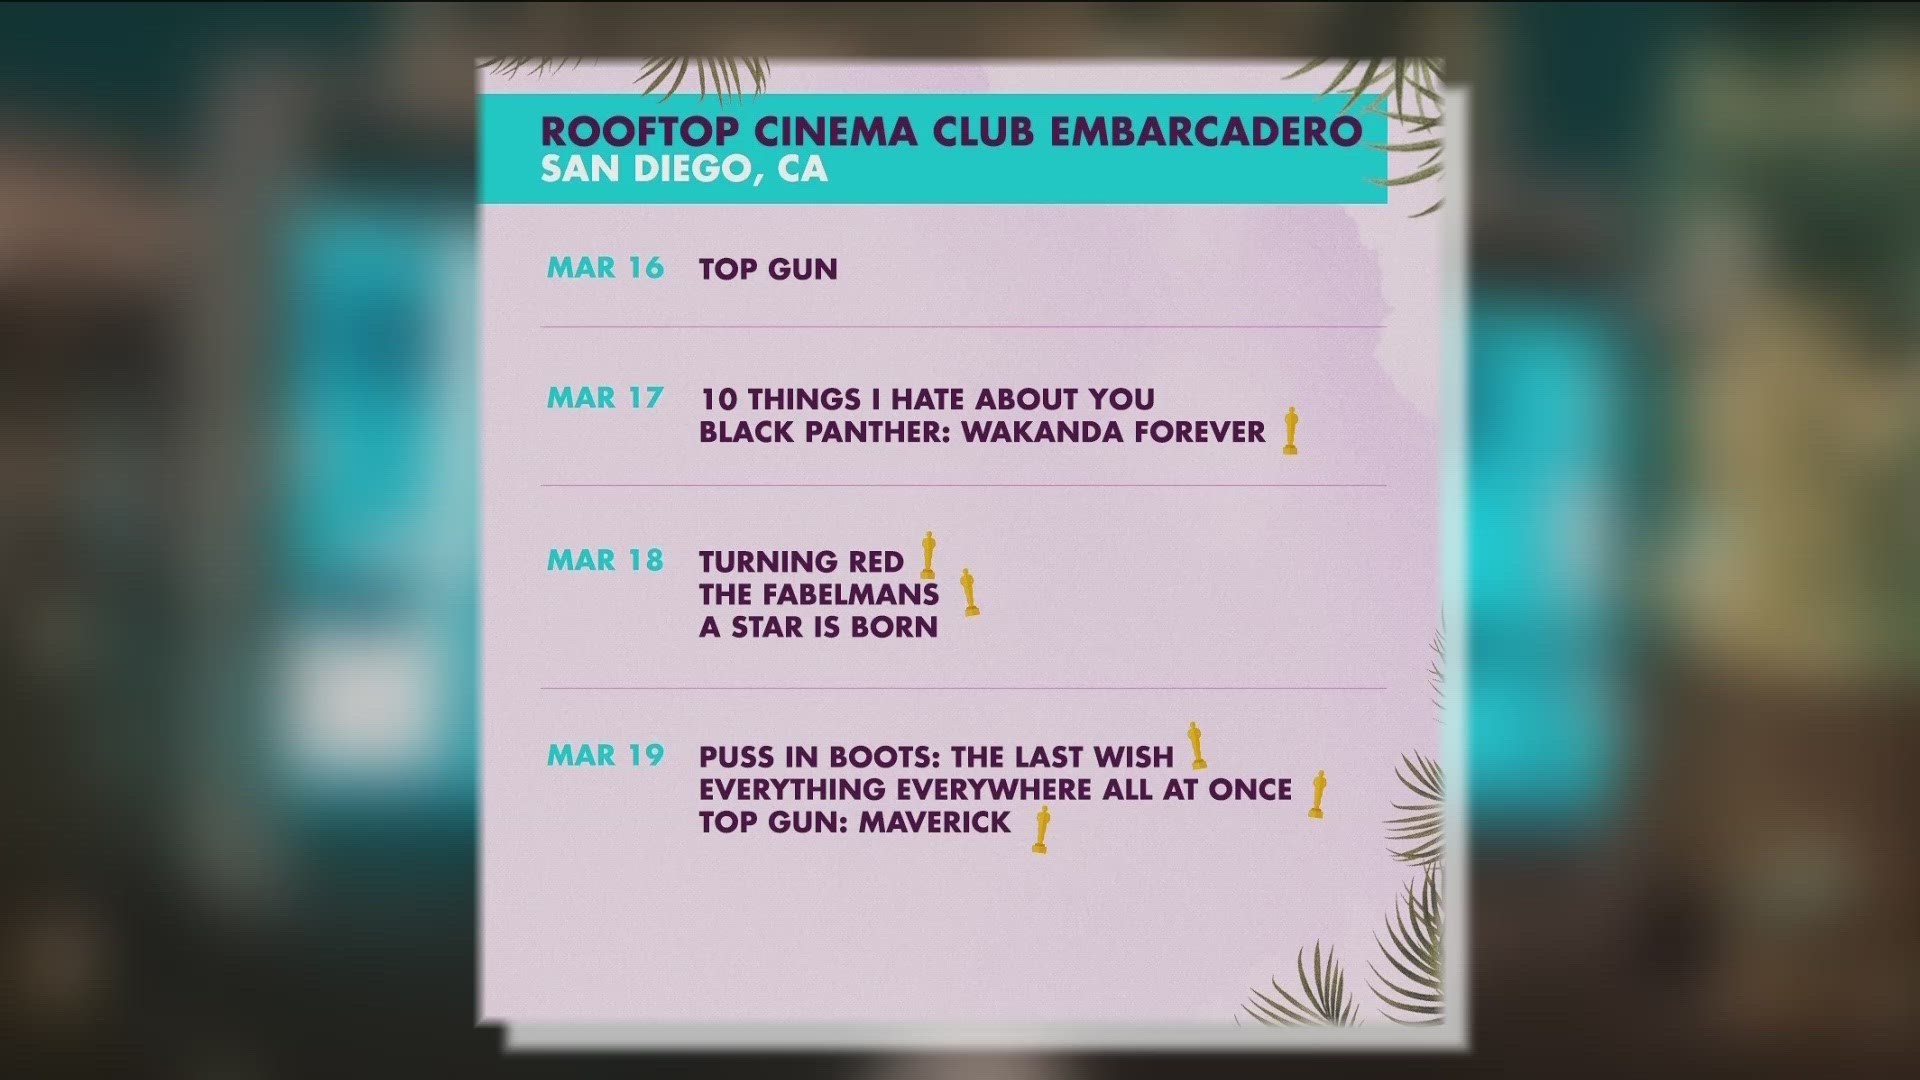 The founder of the Rooftop Cinema Club, Gerry Cottle talked about the experience and what movies they will be showing.